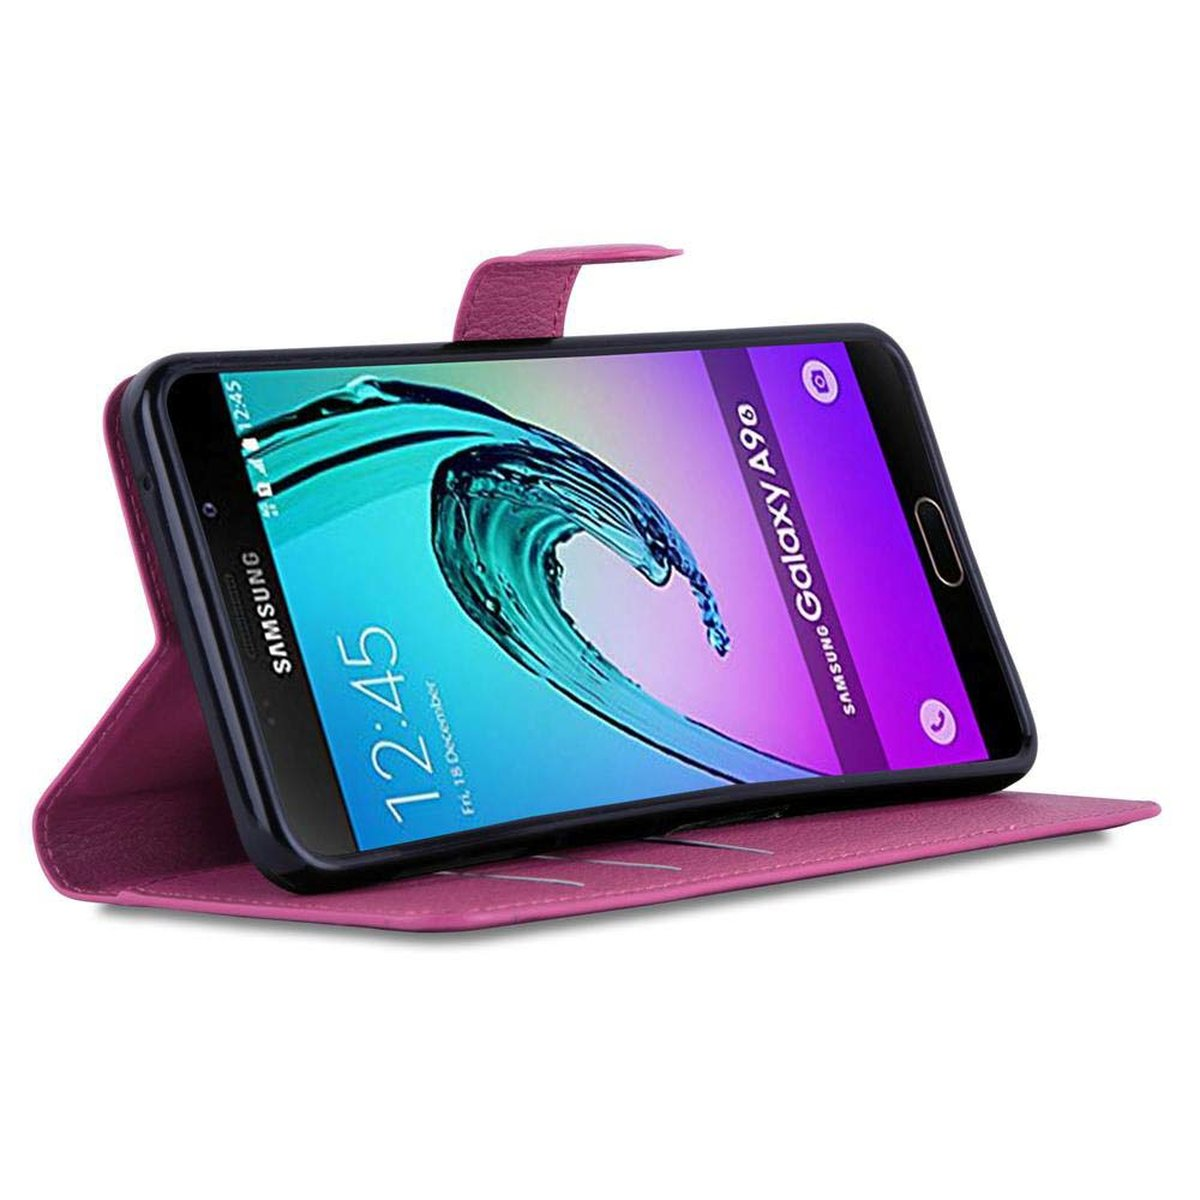 Hülle Bookcover, CADORABO CHERRY A9 Galaxy Samsung, Book PINK Standfunktion, 2016,